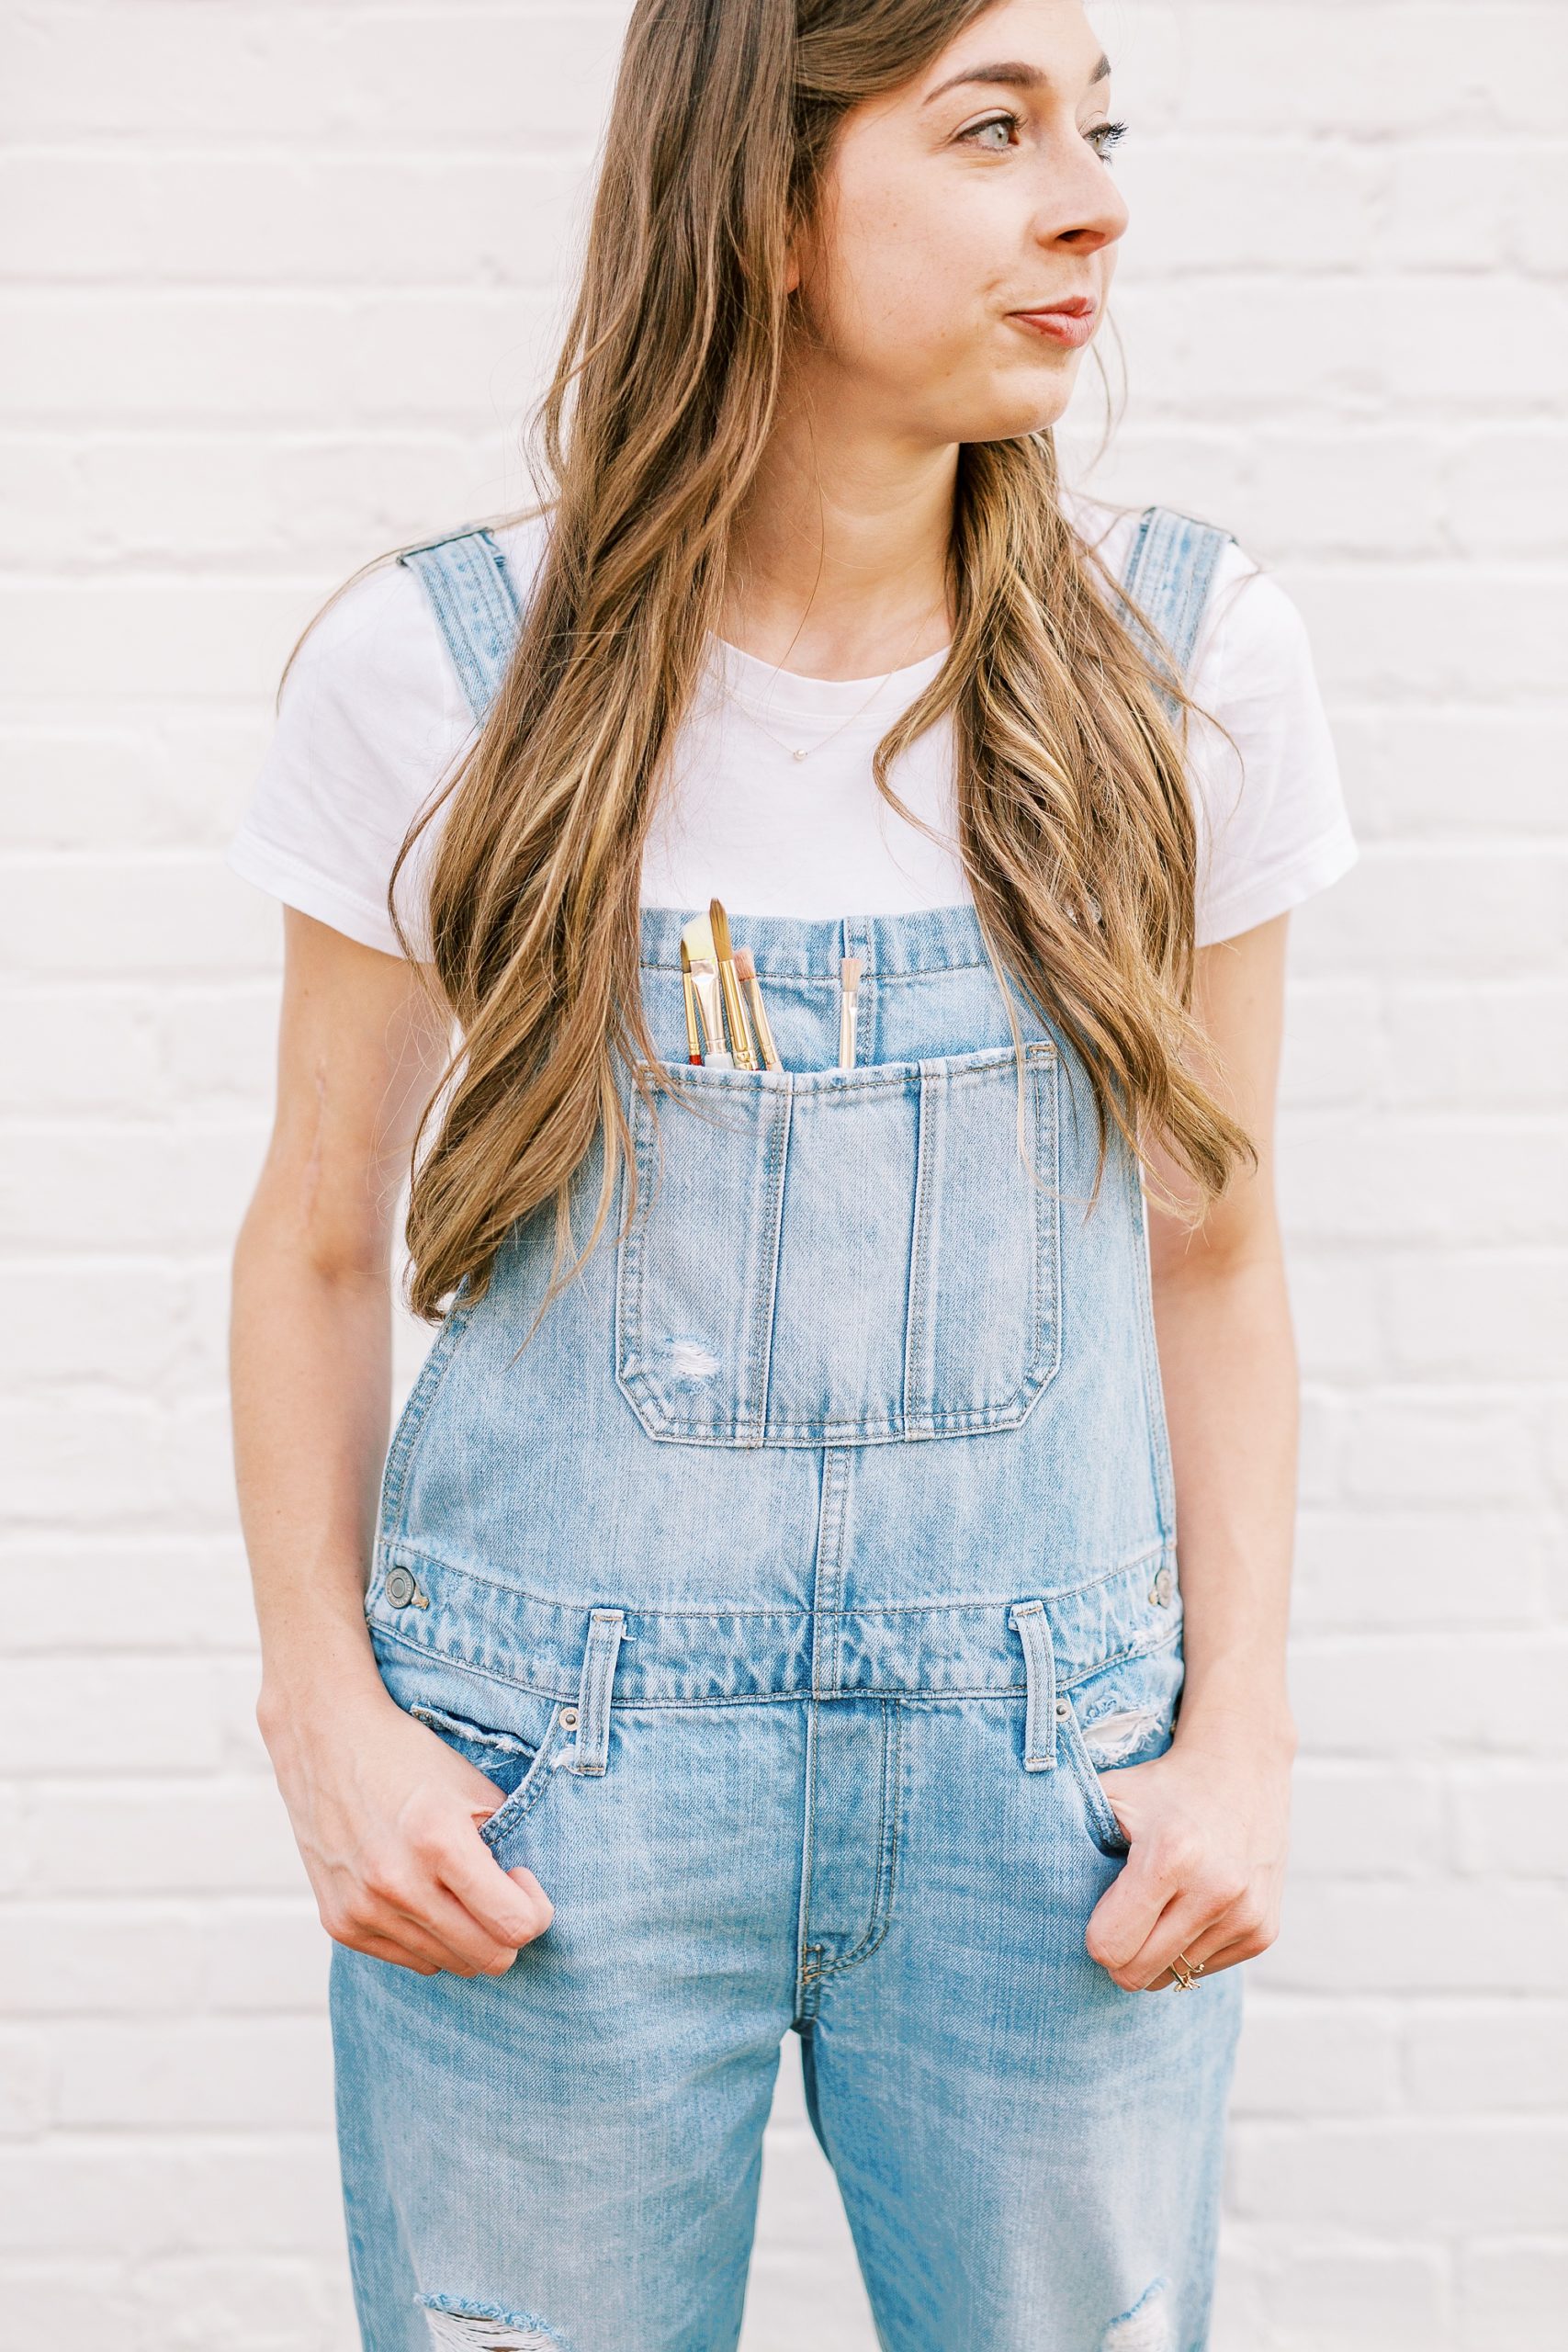 NC artist in overalls in front of white wall during branding portraits